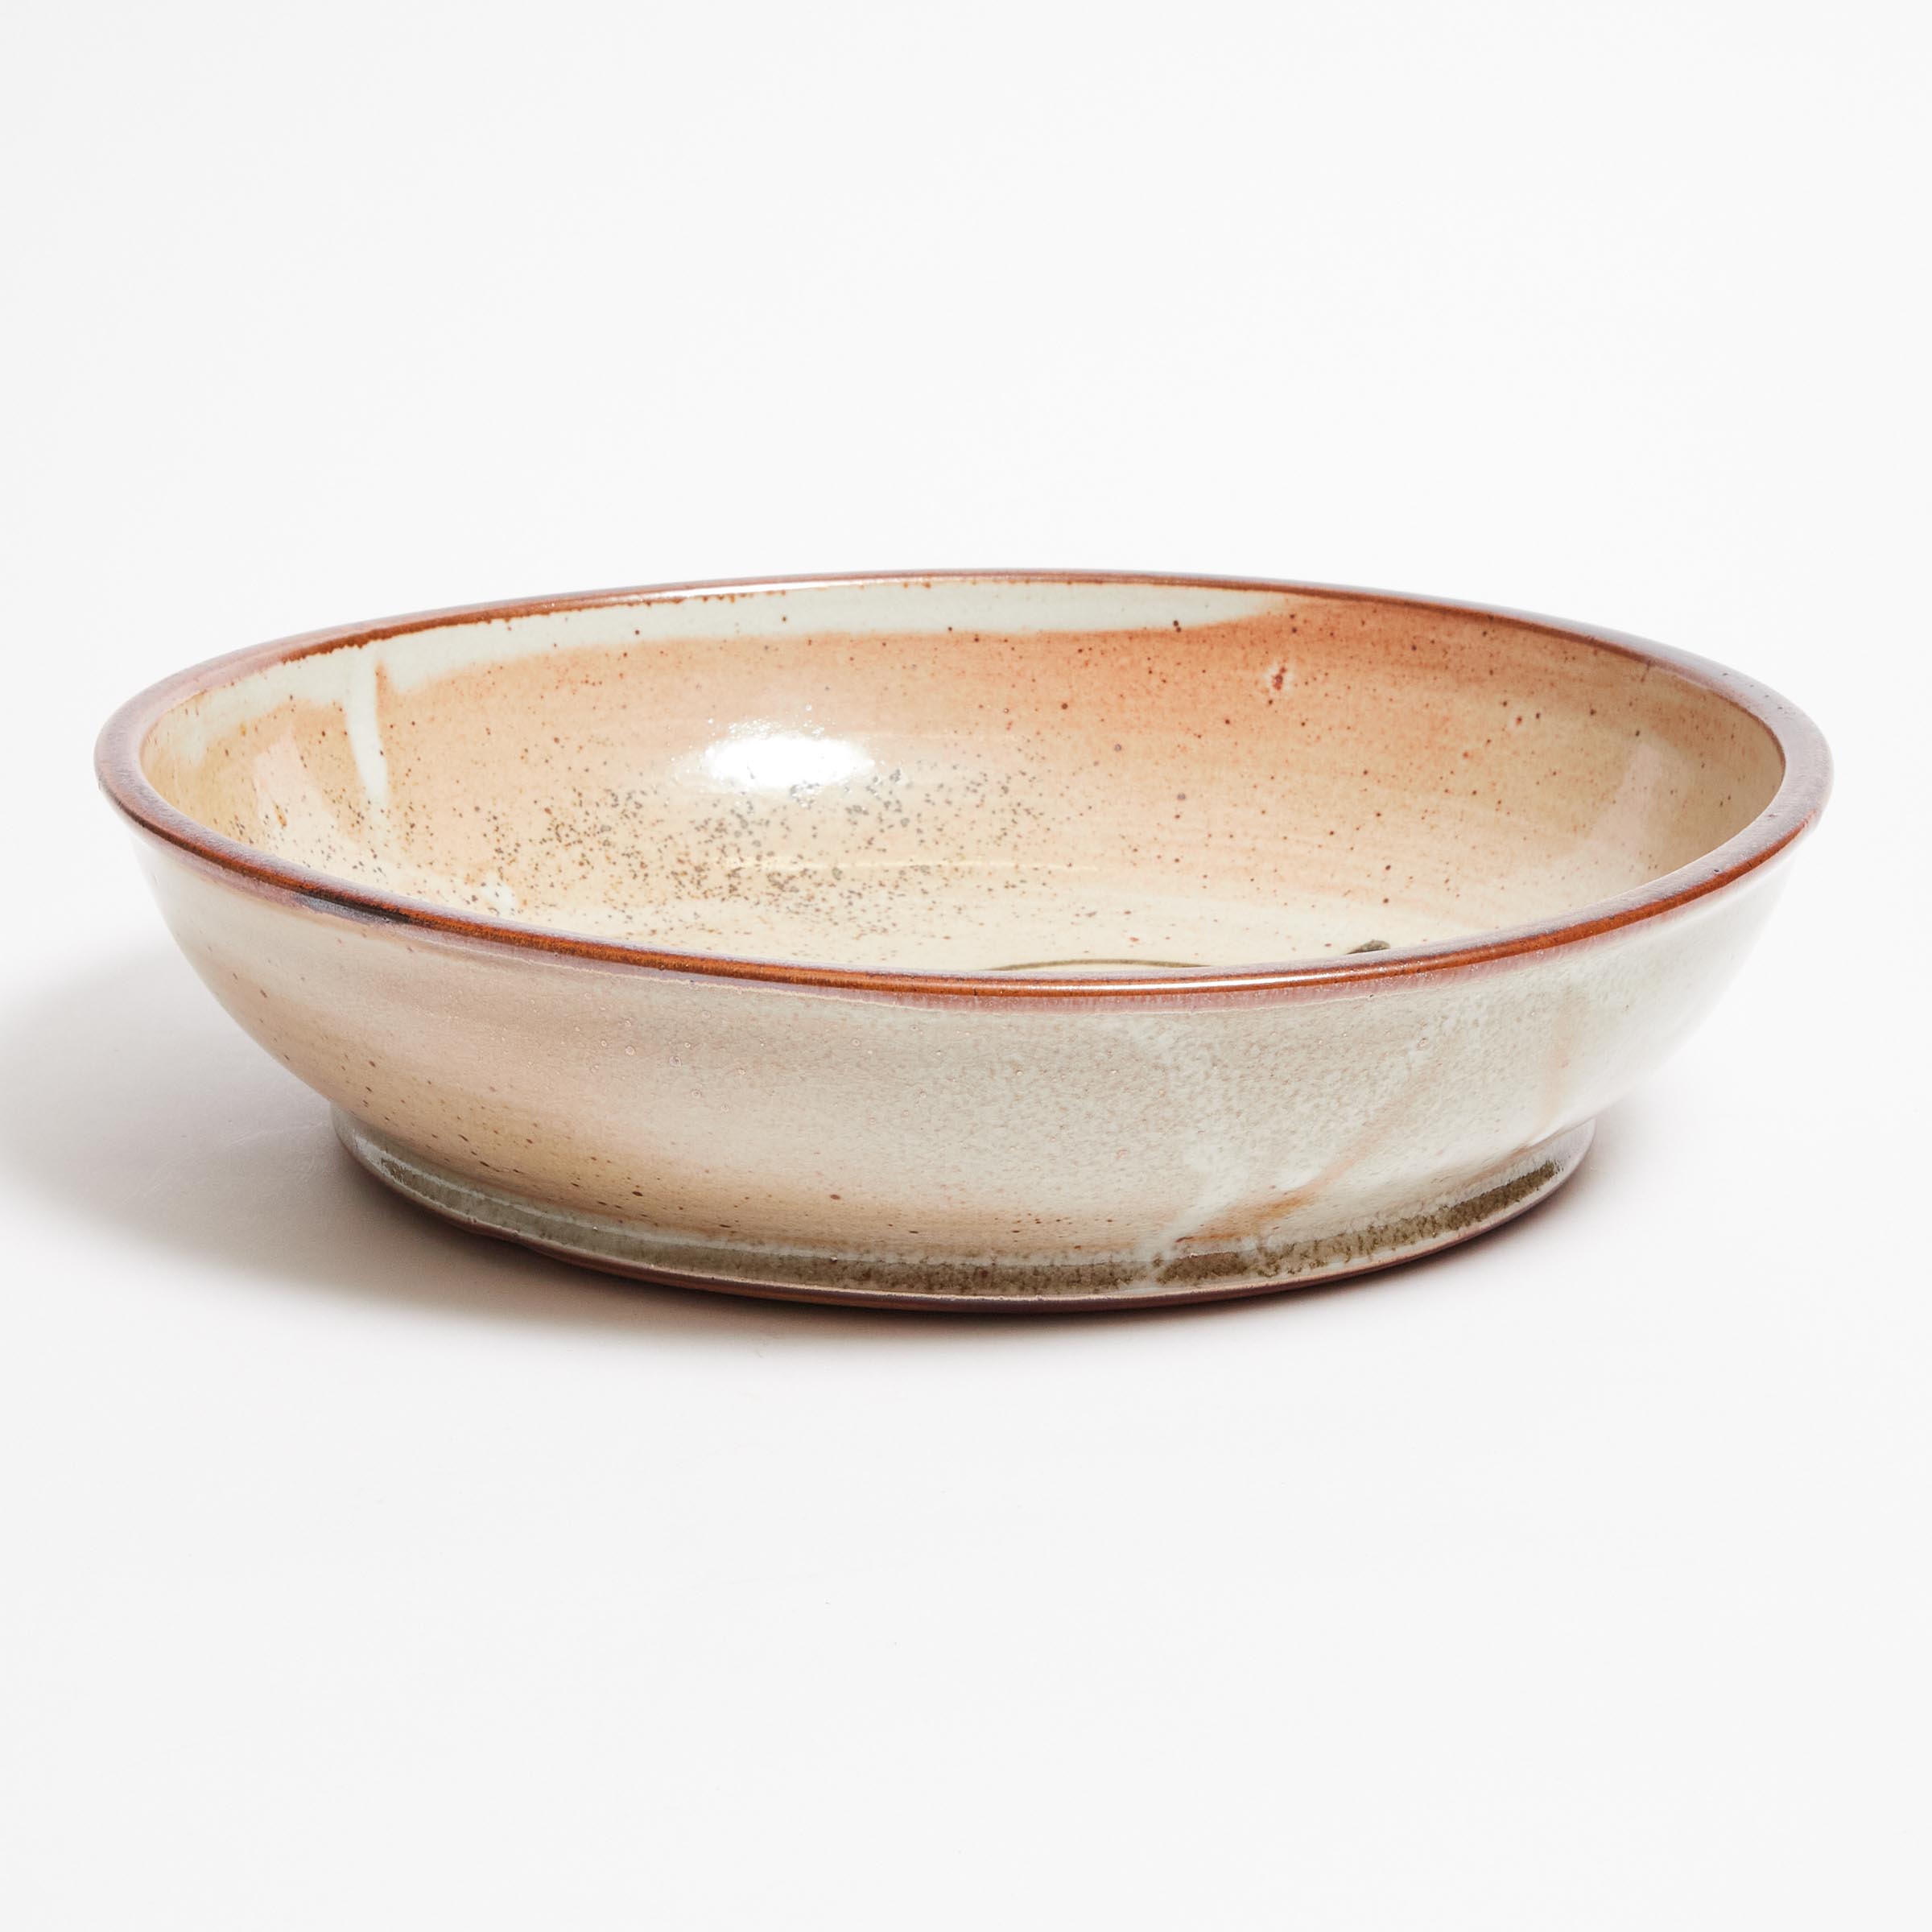 Canadian School Studio Pottery, Large Bowl with Leaf Decoration, mid-20th century, diameter 14.8 in - Image 2 of 2